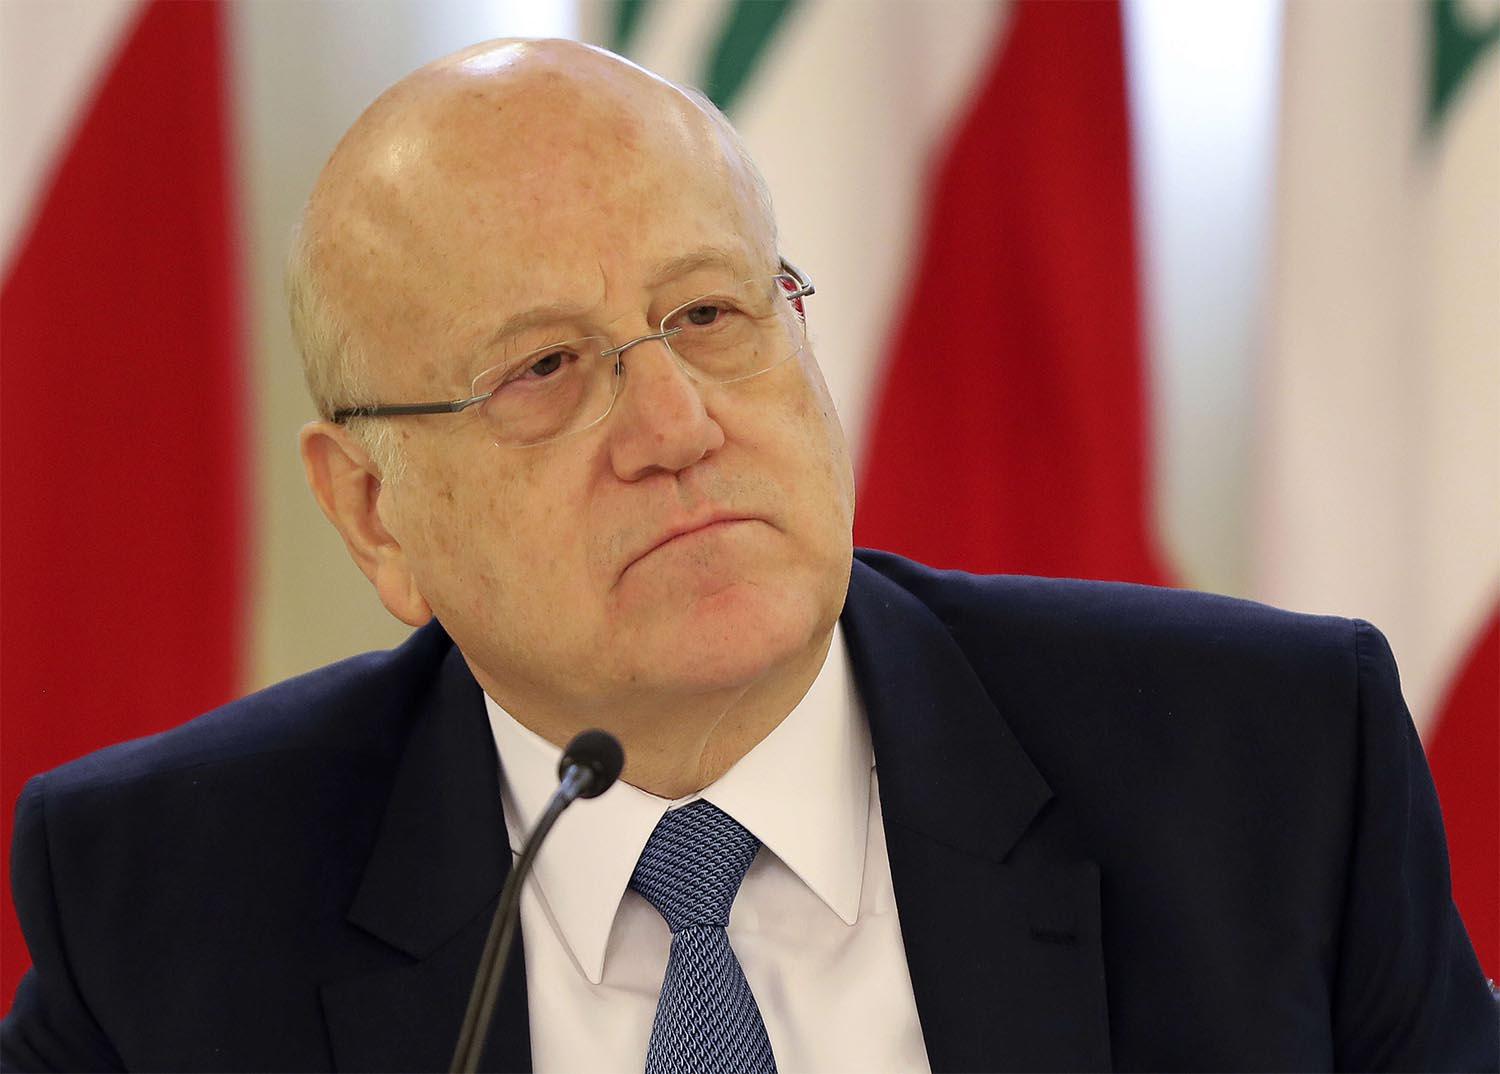 Lebanon has no president and no fully-empowered government